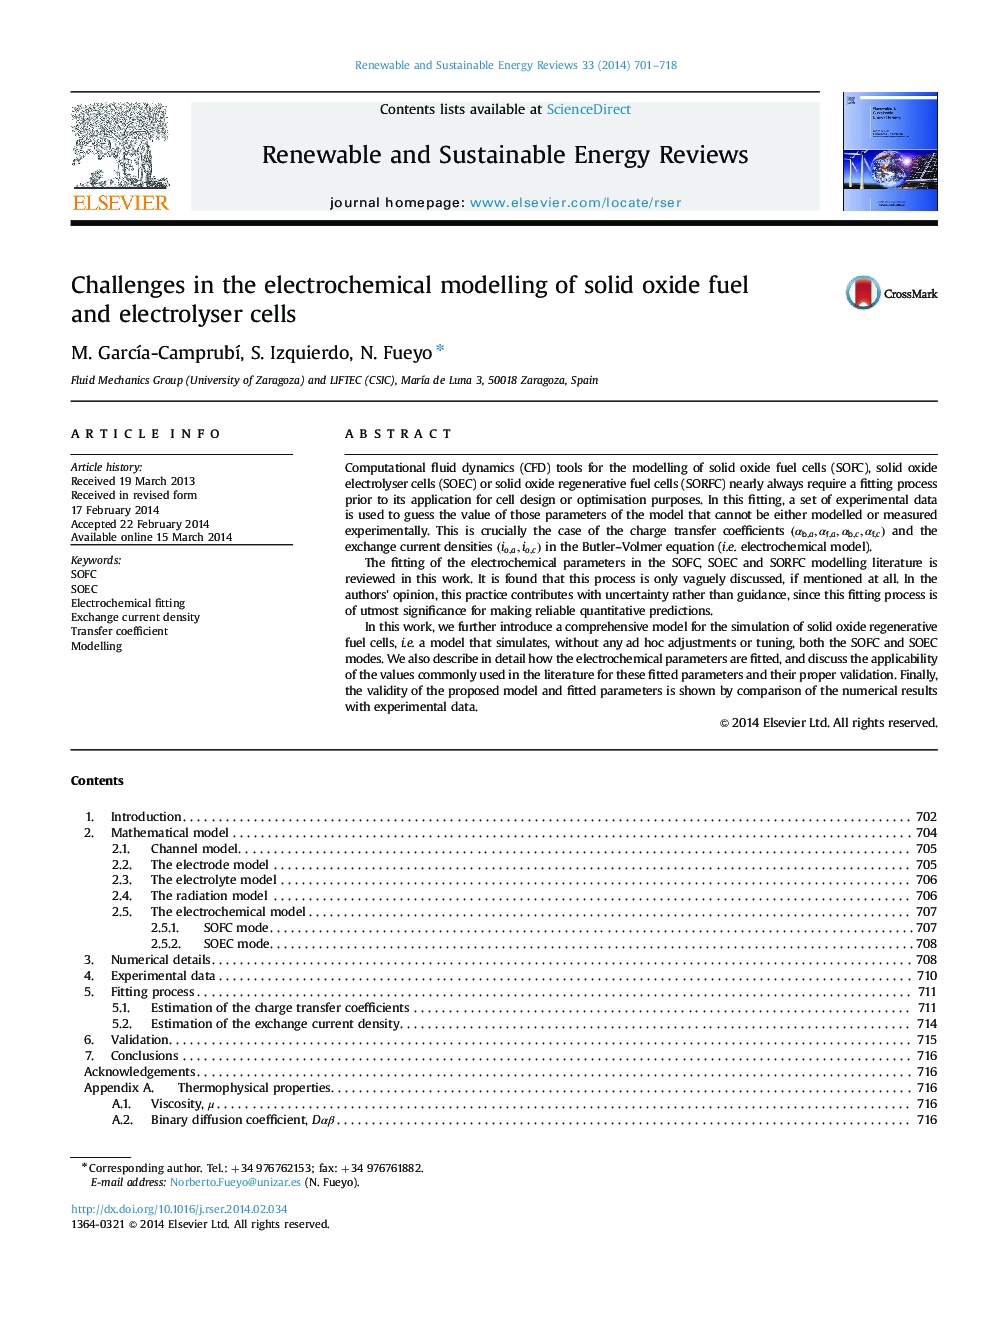 Challenges in the electrochemical modelling of solid oxide fuel and electrolyser cells